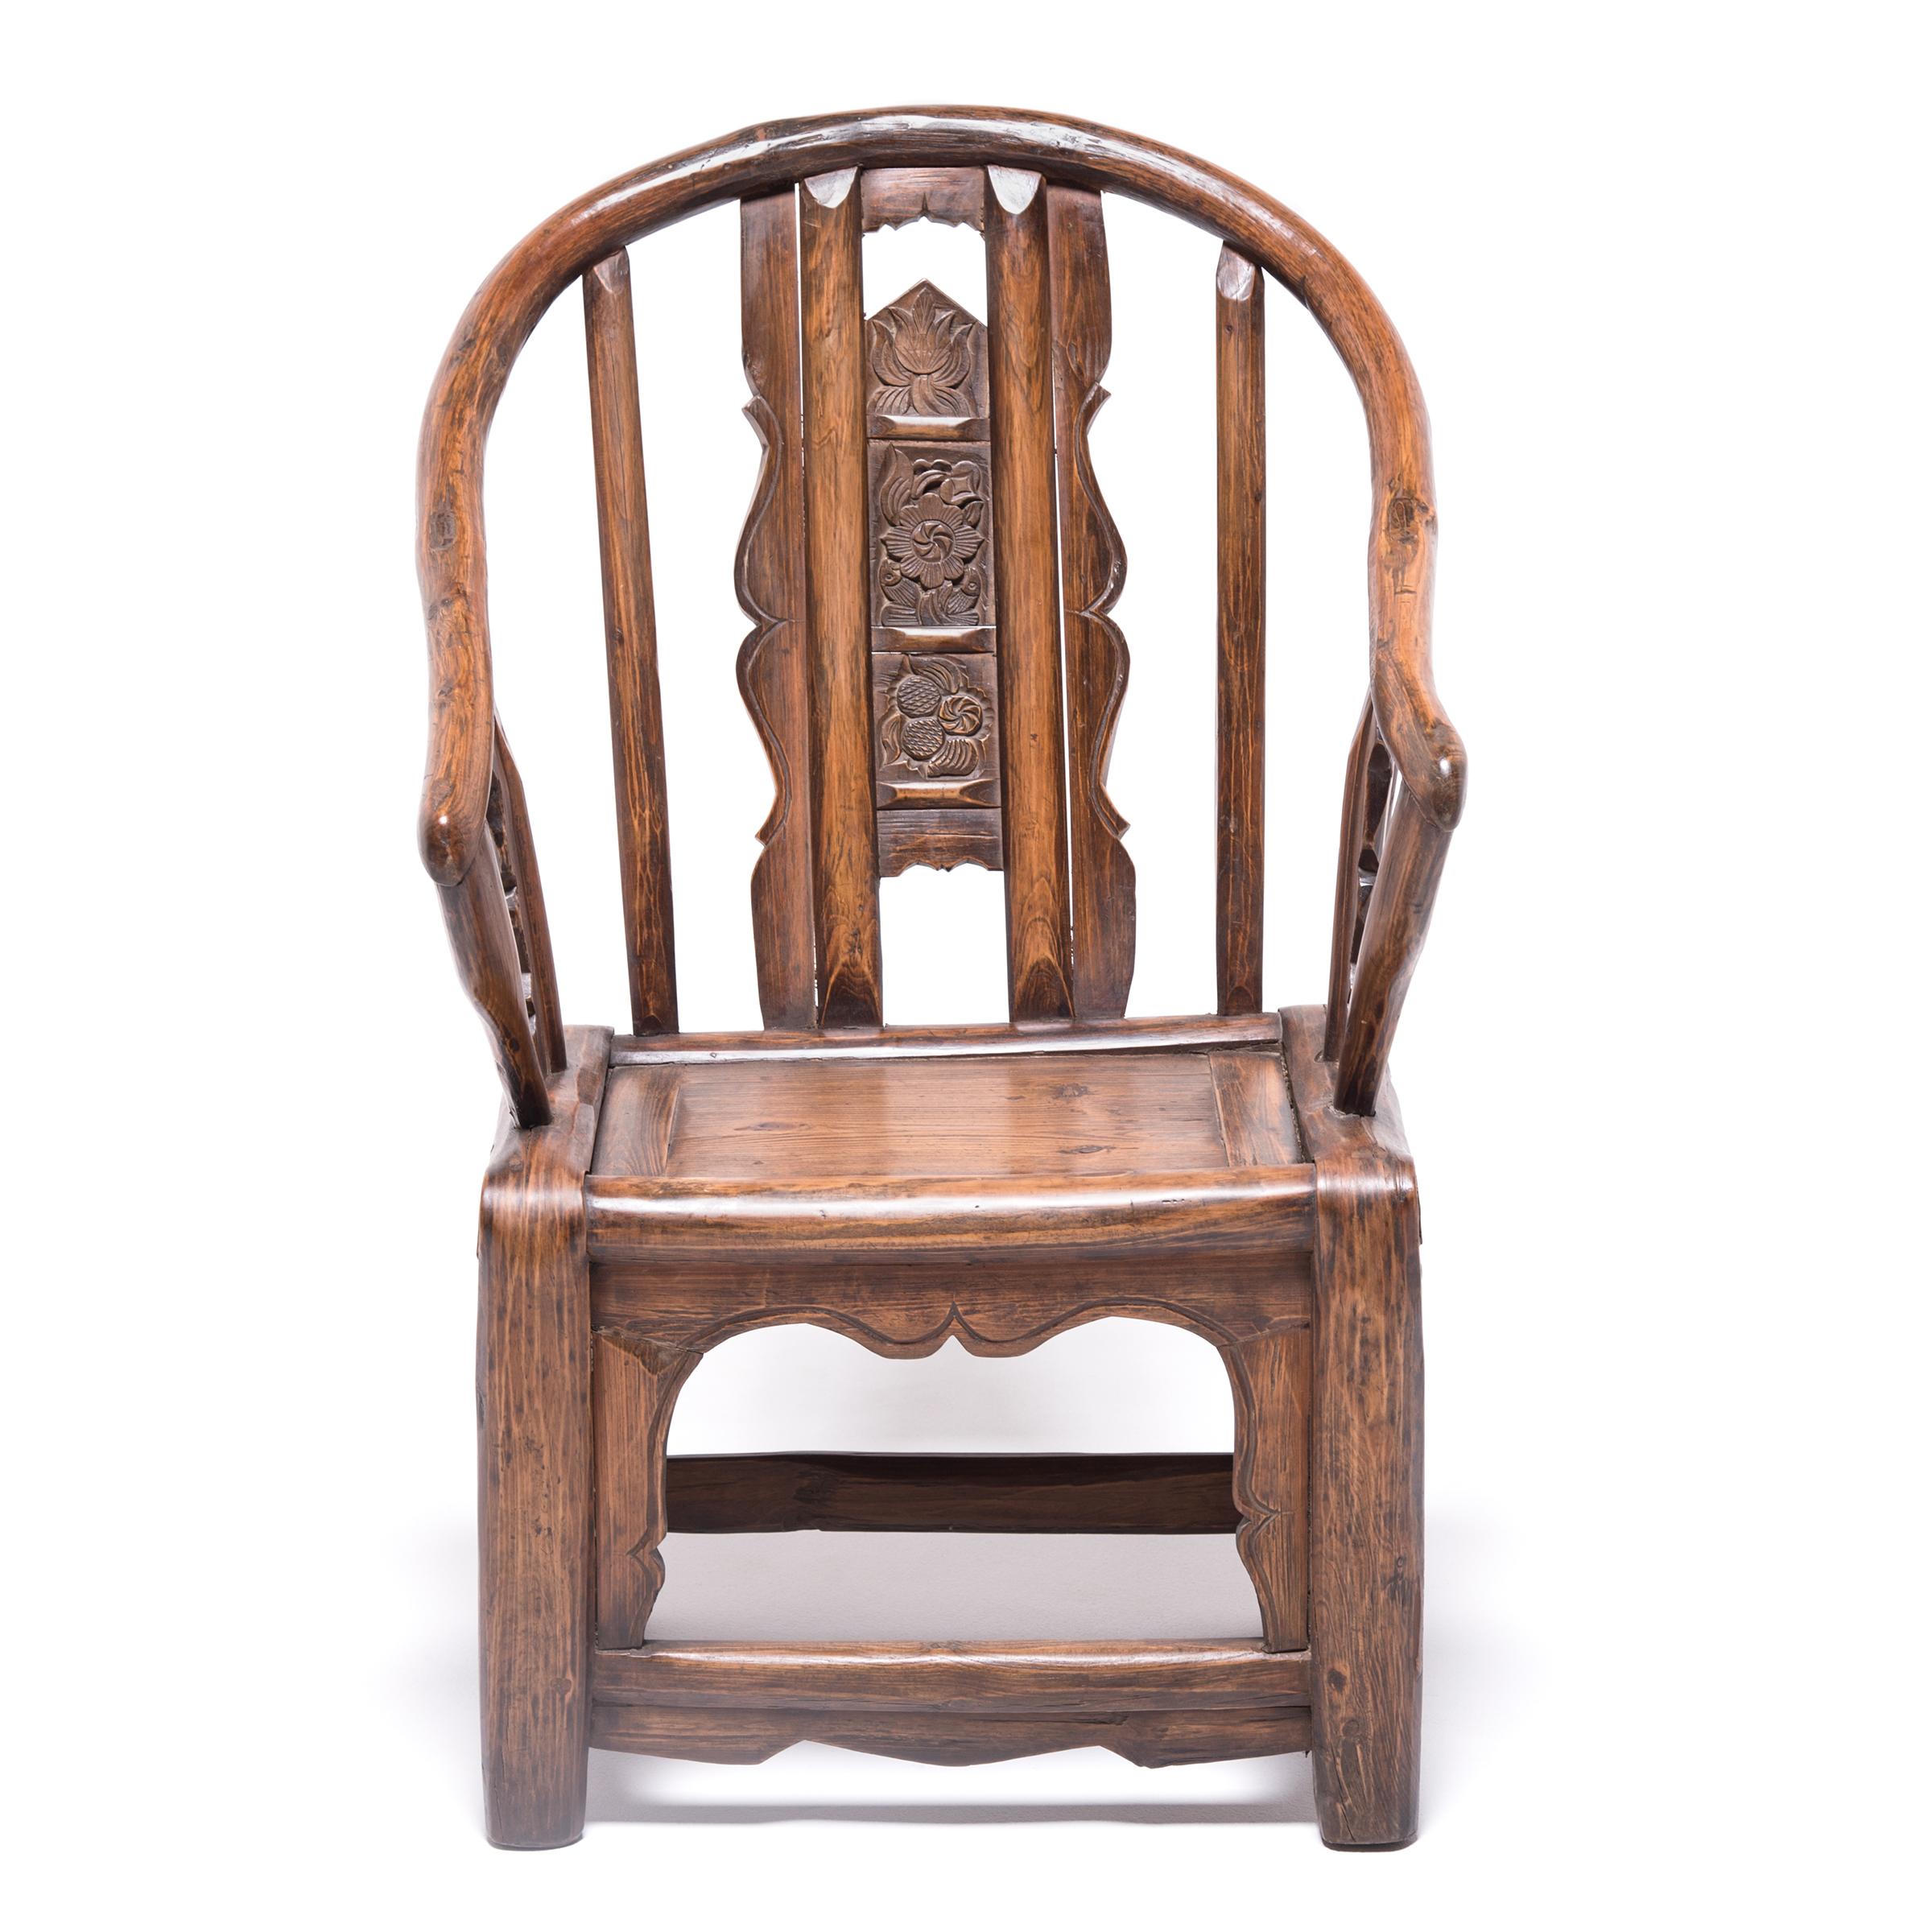 This bentwood chair was created over a century ago in northern China by moistening, bending, and heating willow to form its desired shape. It is beautifully carved with auspicious flowers and is considerably smaller than most roundback chairs. As